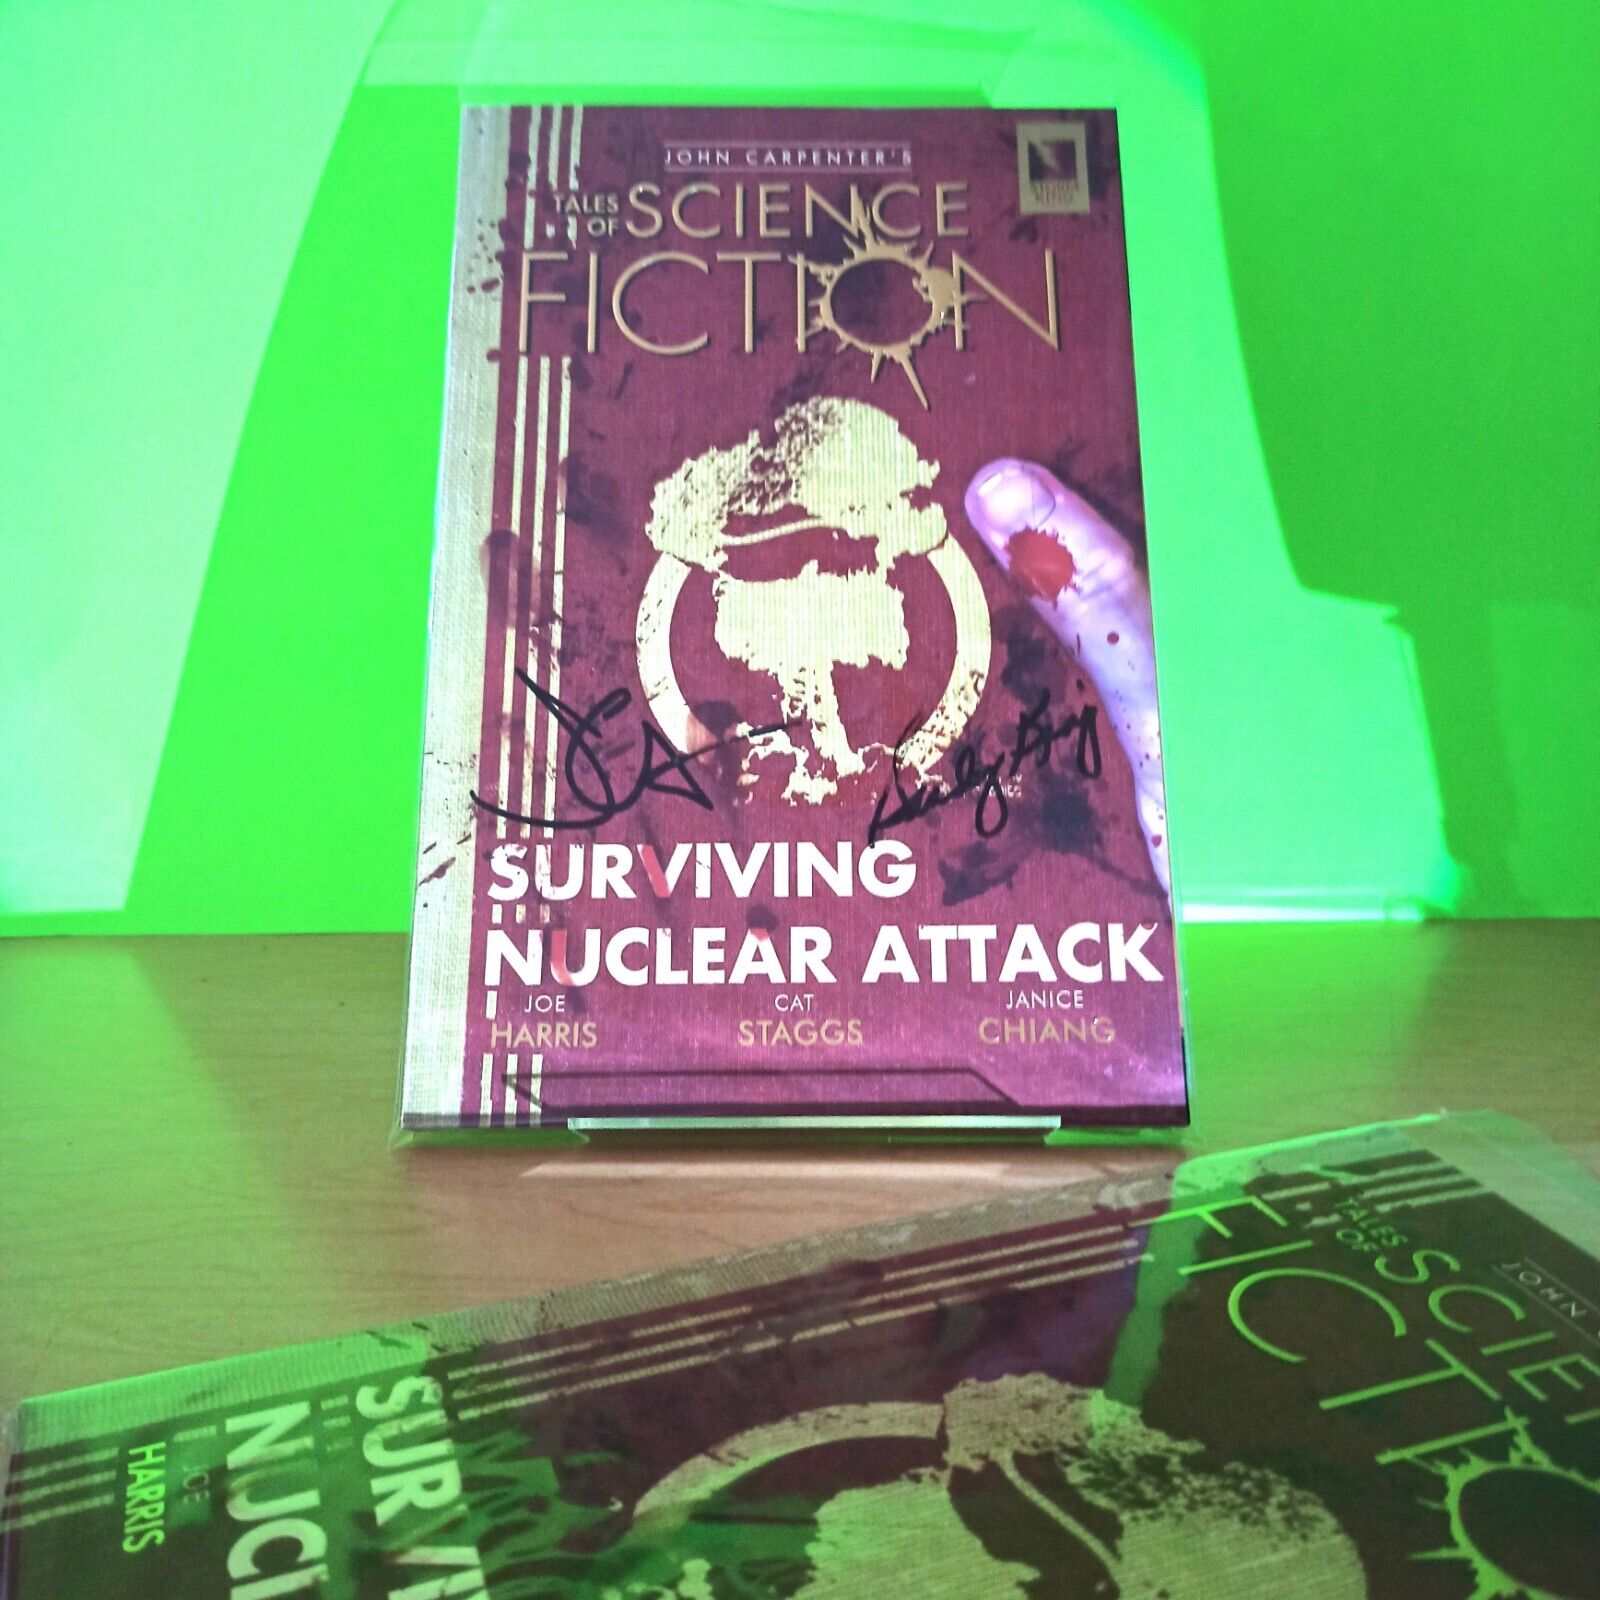 John Carpenters Tales of Science Fiction: SURVIVING NUCLEAR ATTACK Signed - NM